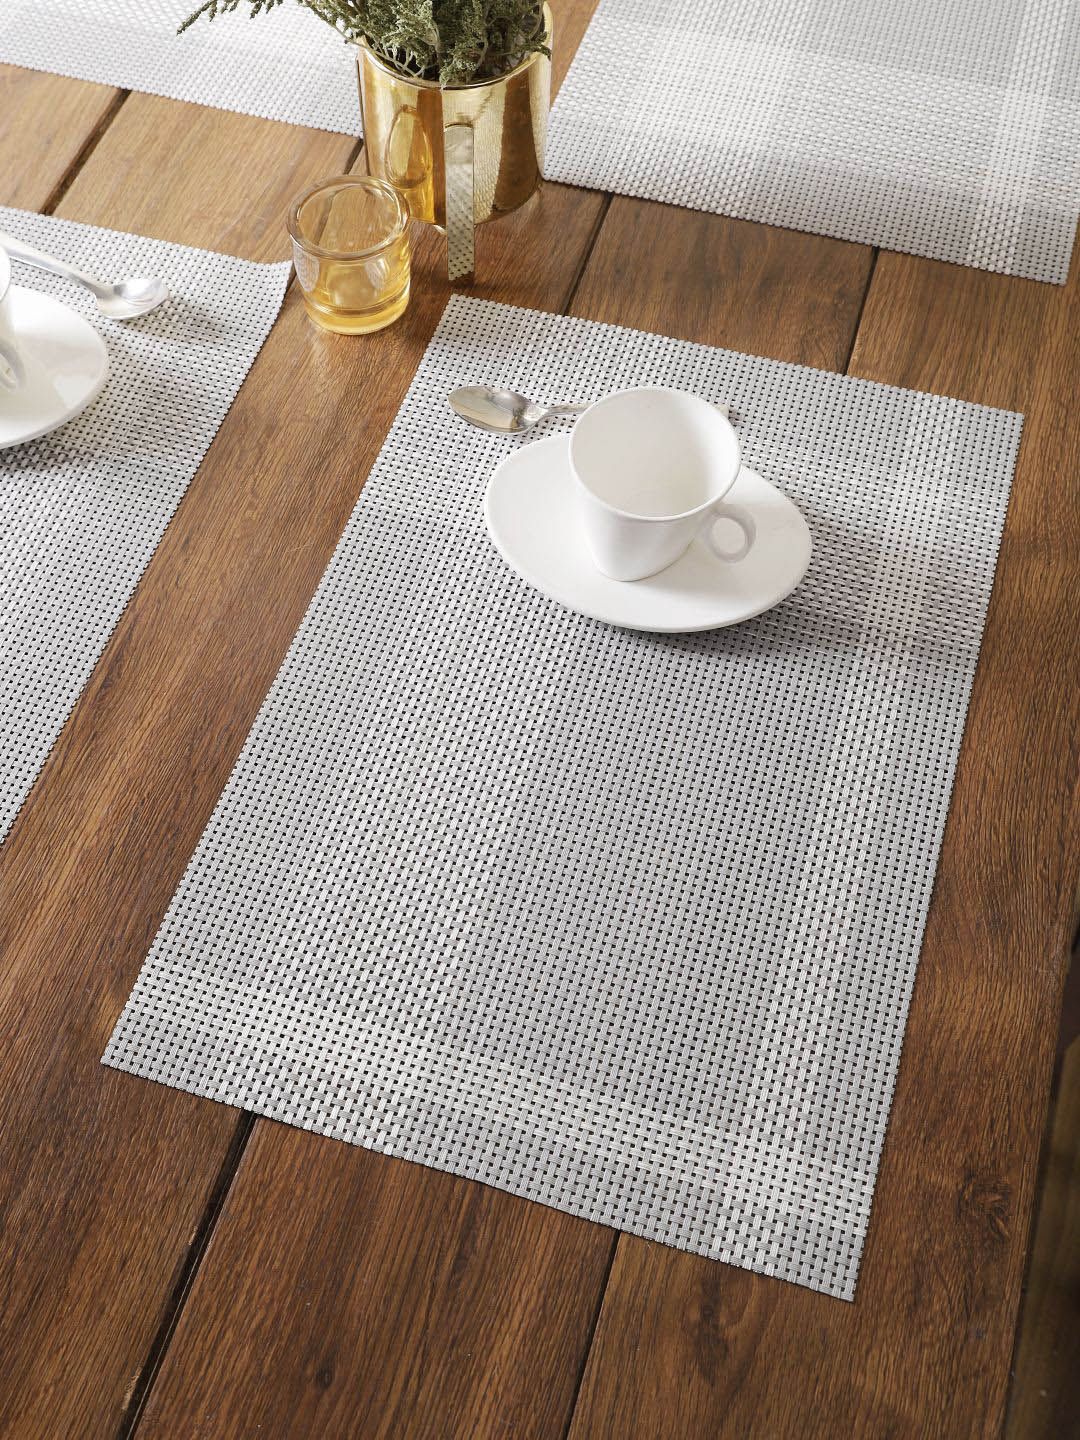 BIANCA Set Of 6 Grey Checked Table Placemats Price in India